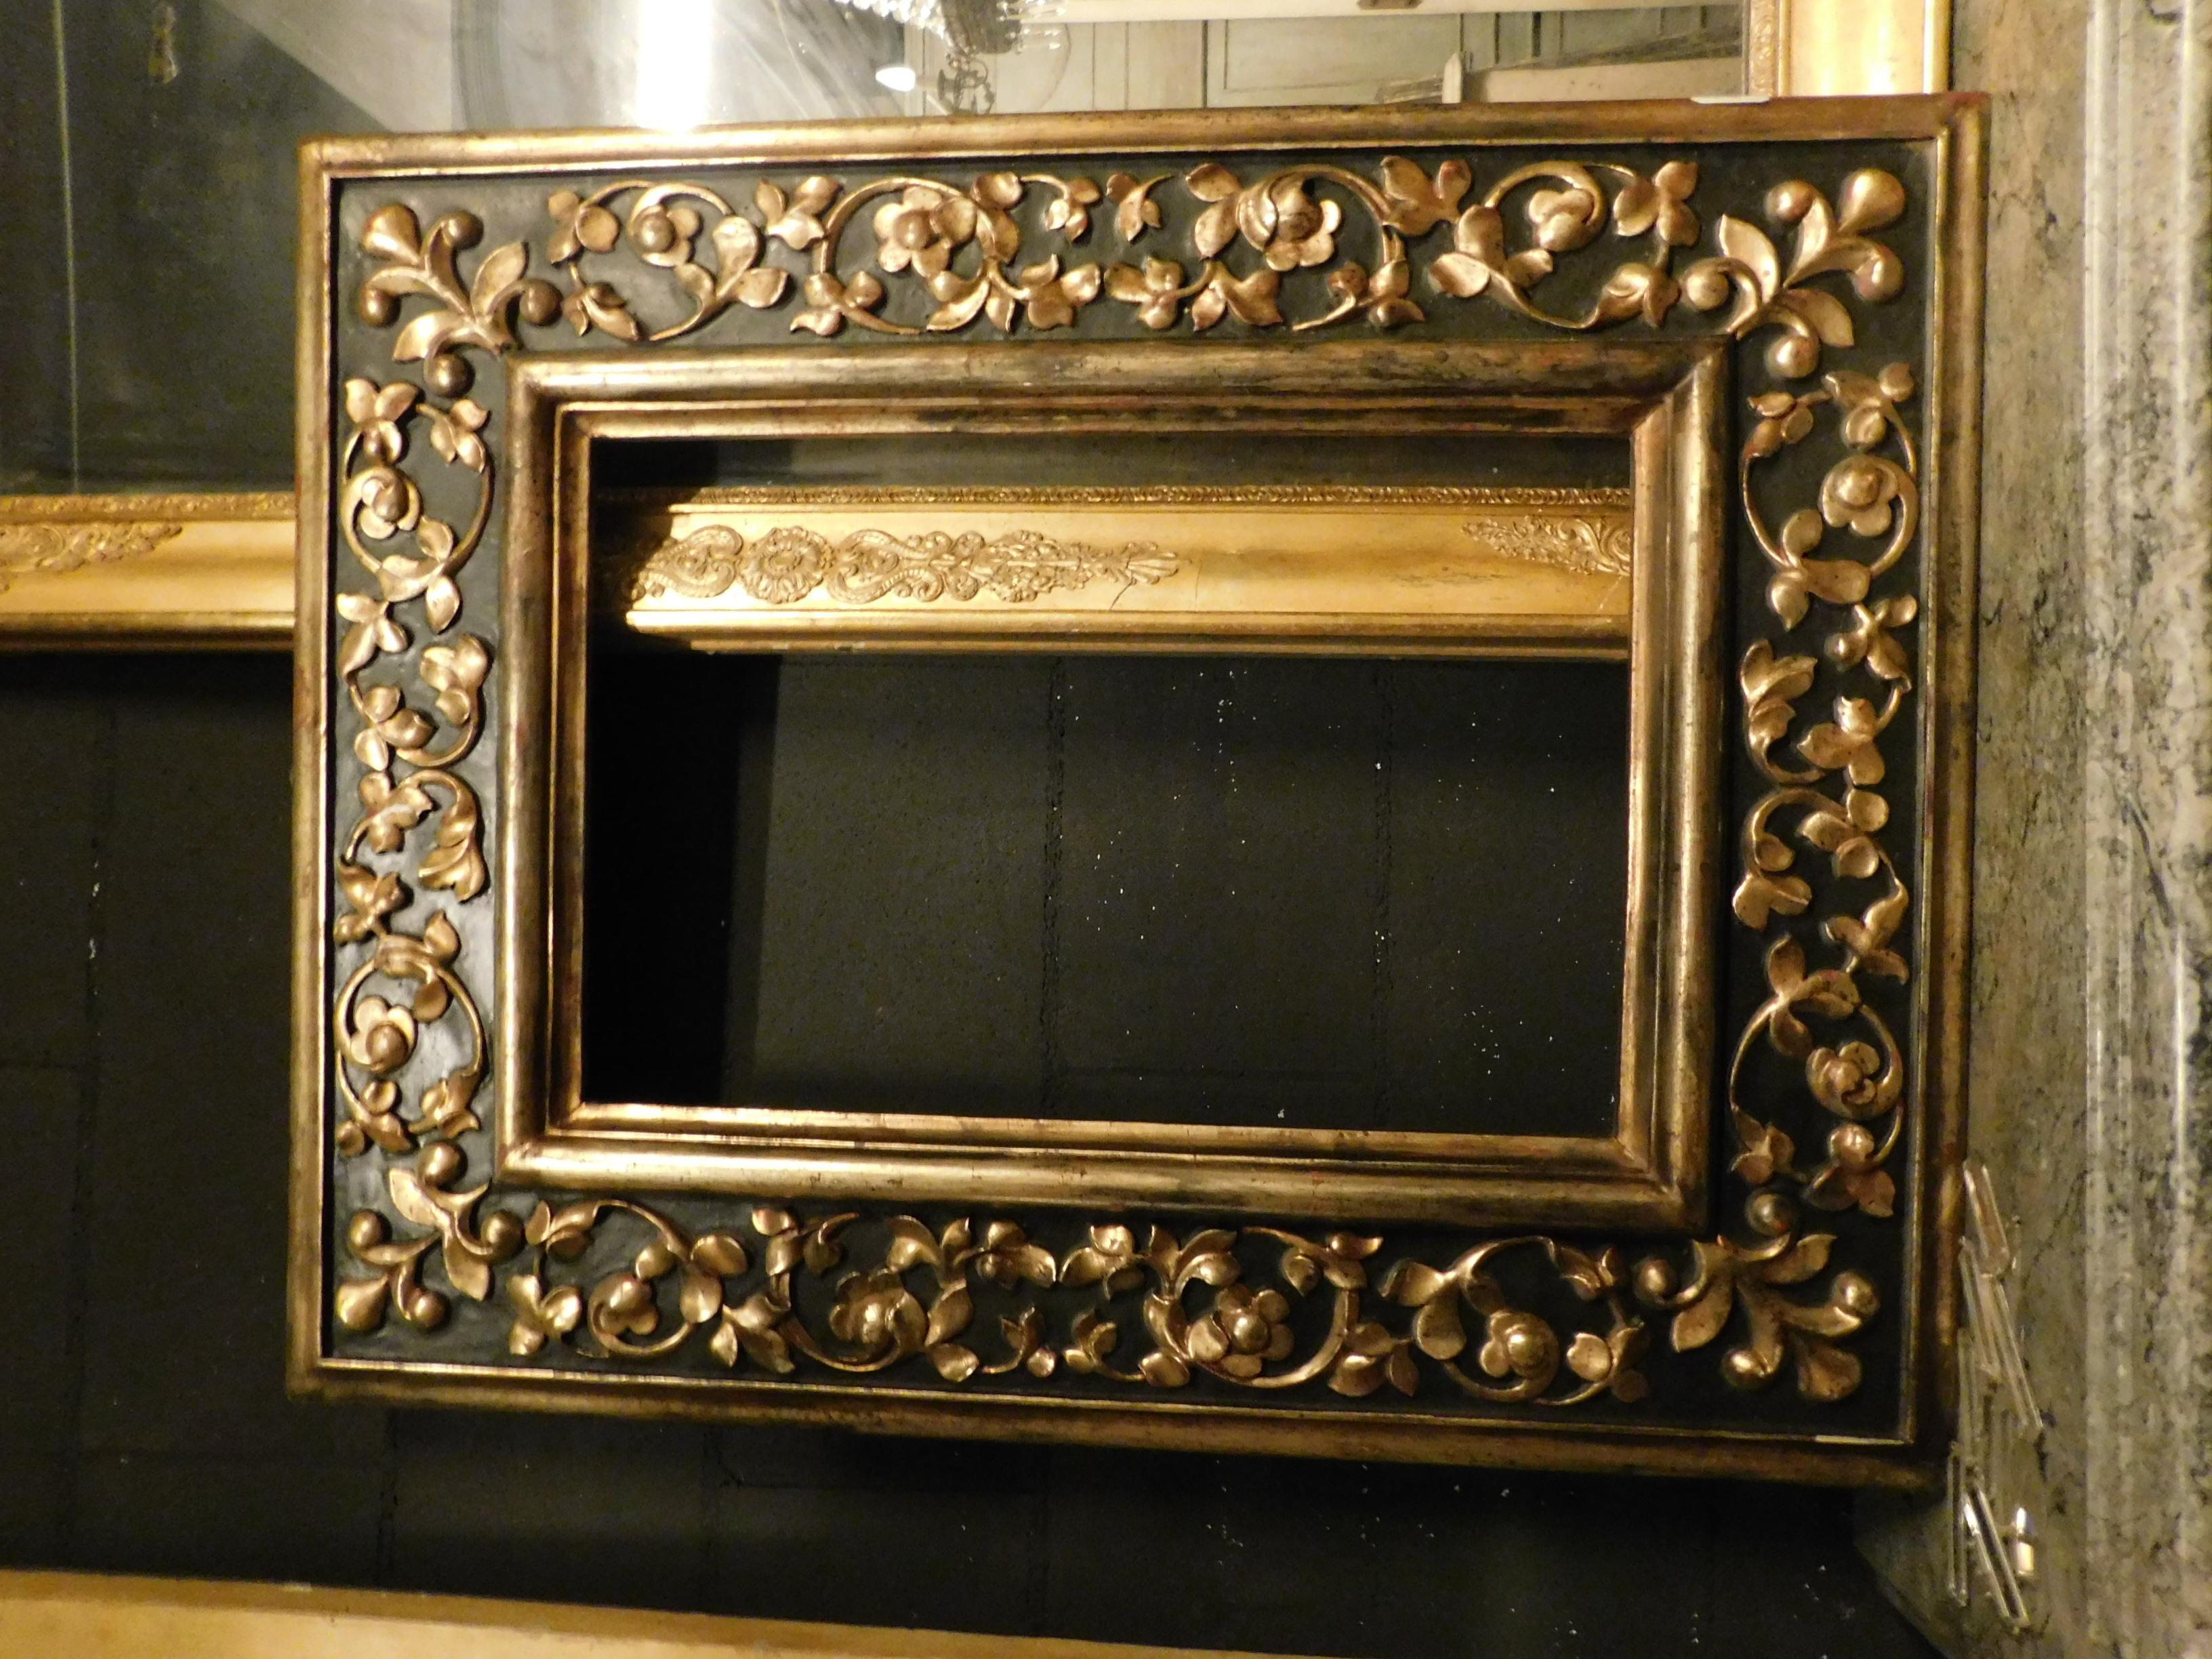 19th century hand carved gilded and wooden floral Italian frame, 1850s.

19th century antique frame carved and decorated with golden floral motifs, 1800.